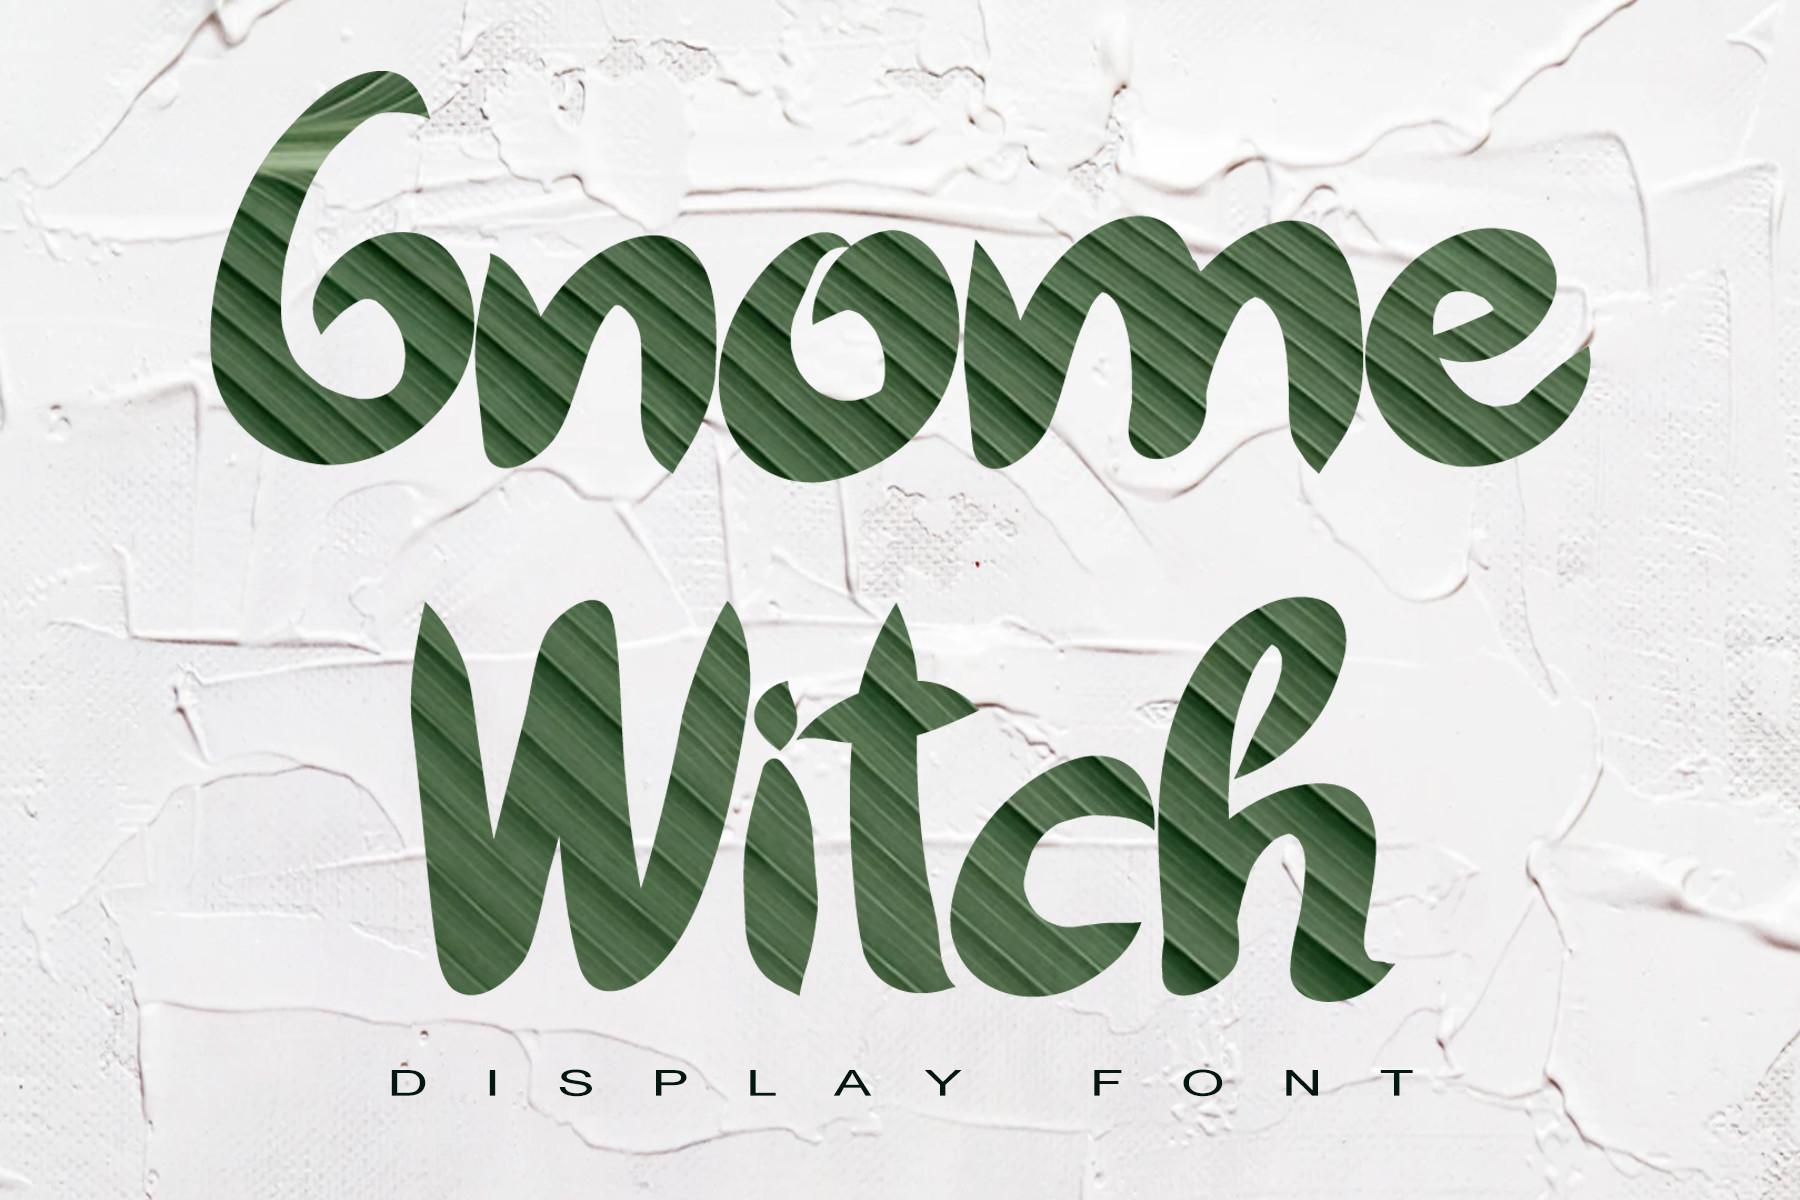 Gnome Witch Font